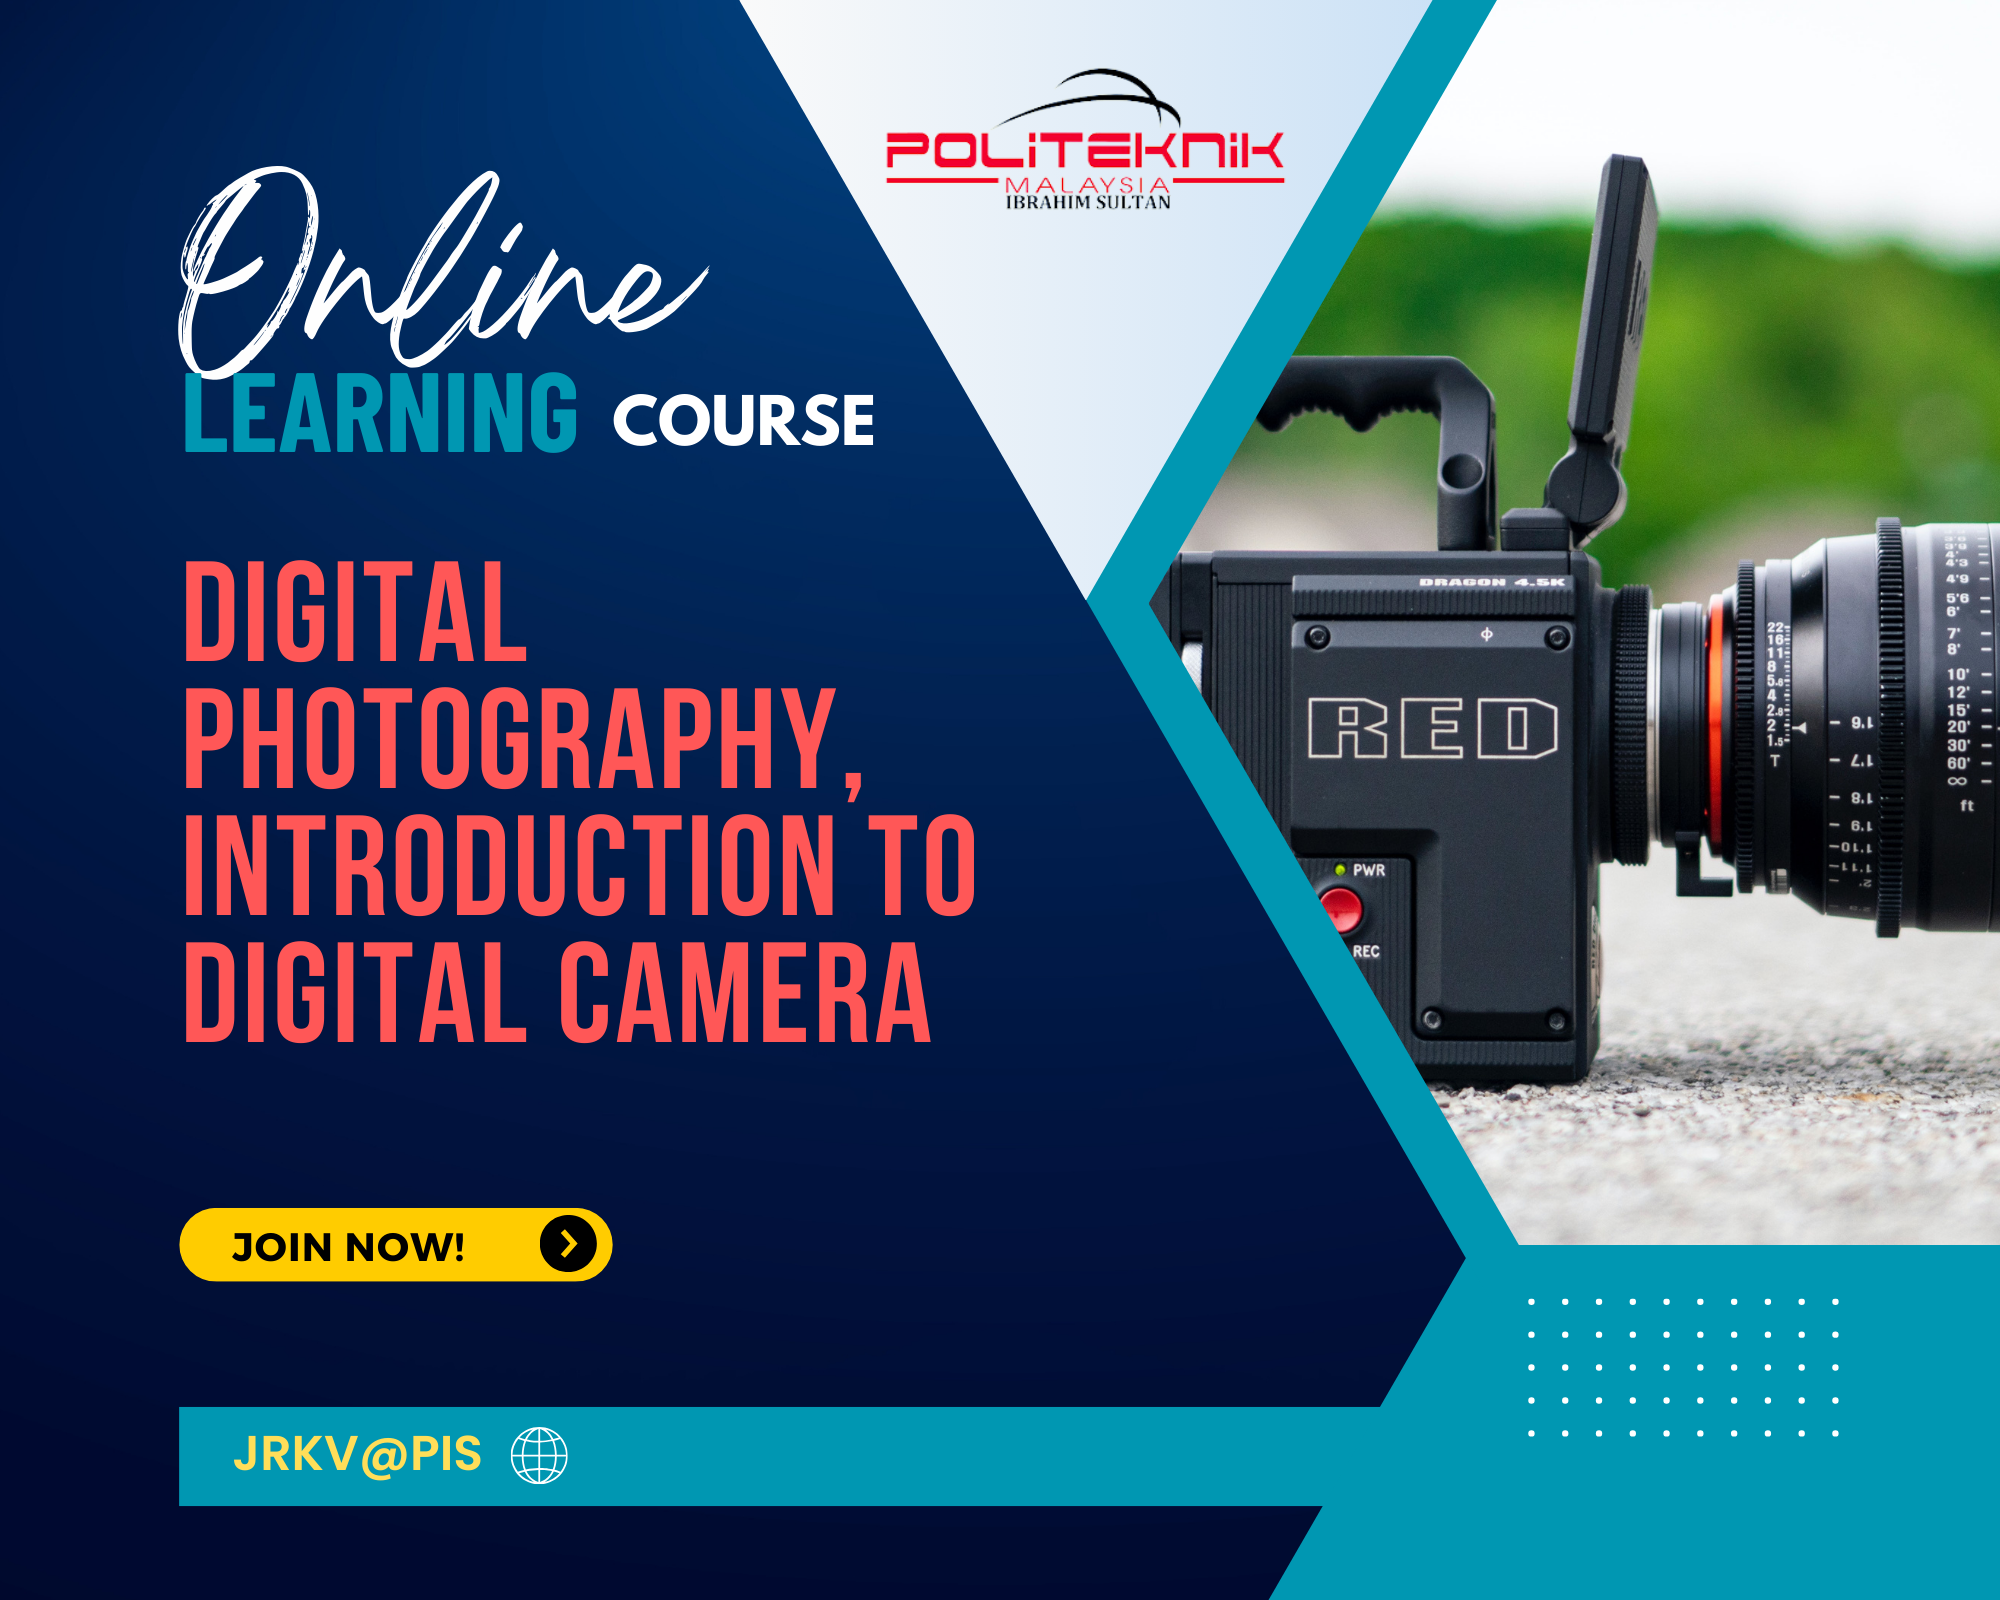 Digital Photography, Introduction to Digital Camera